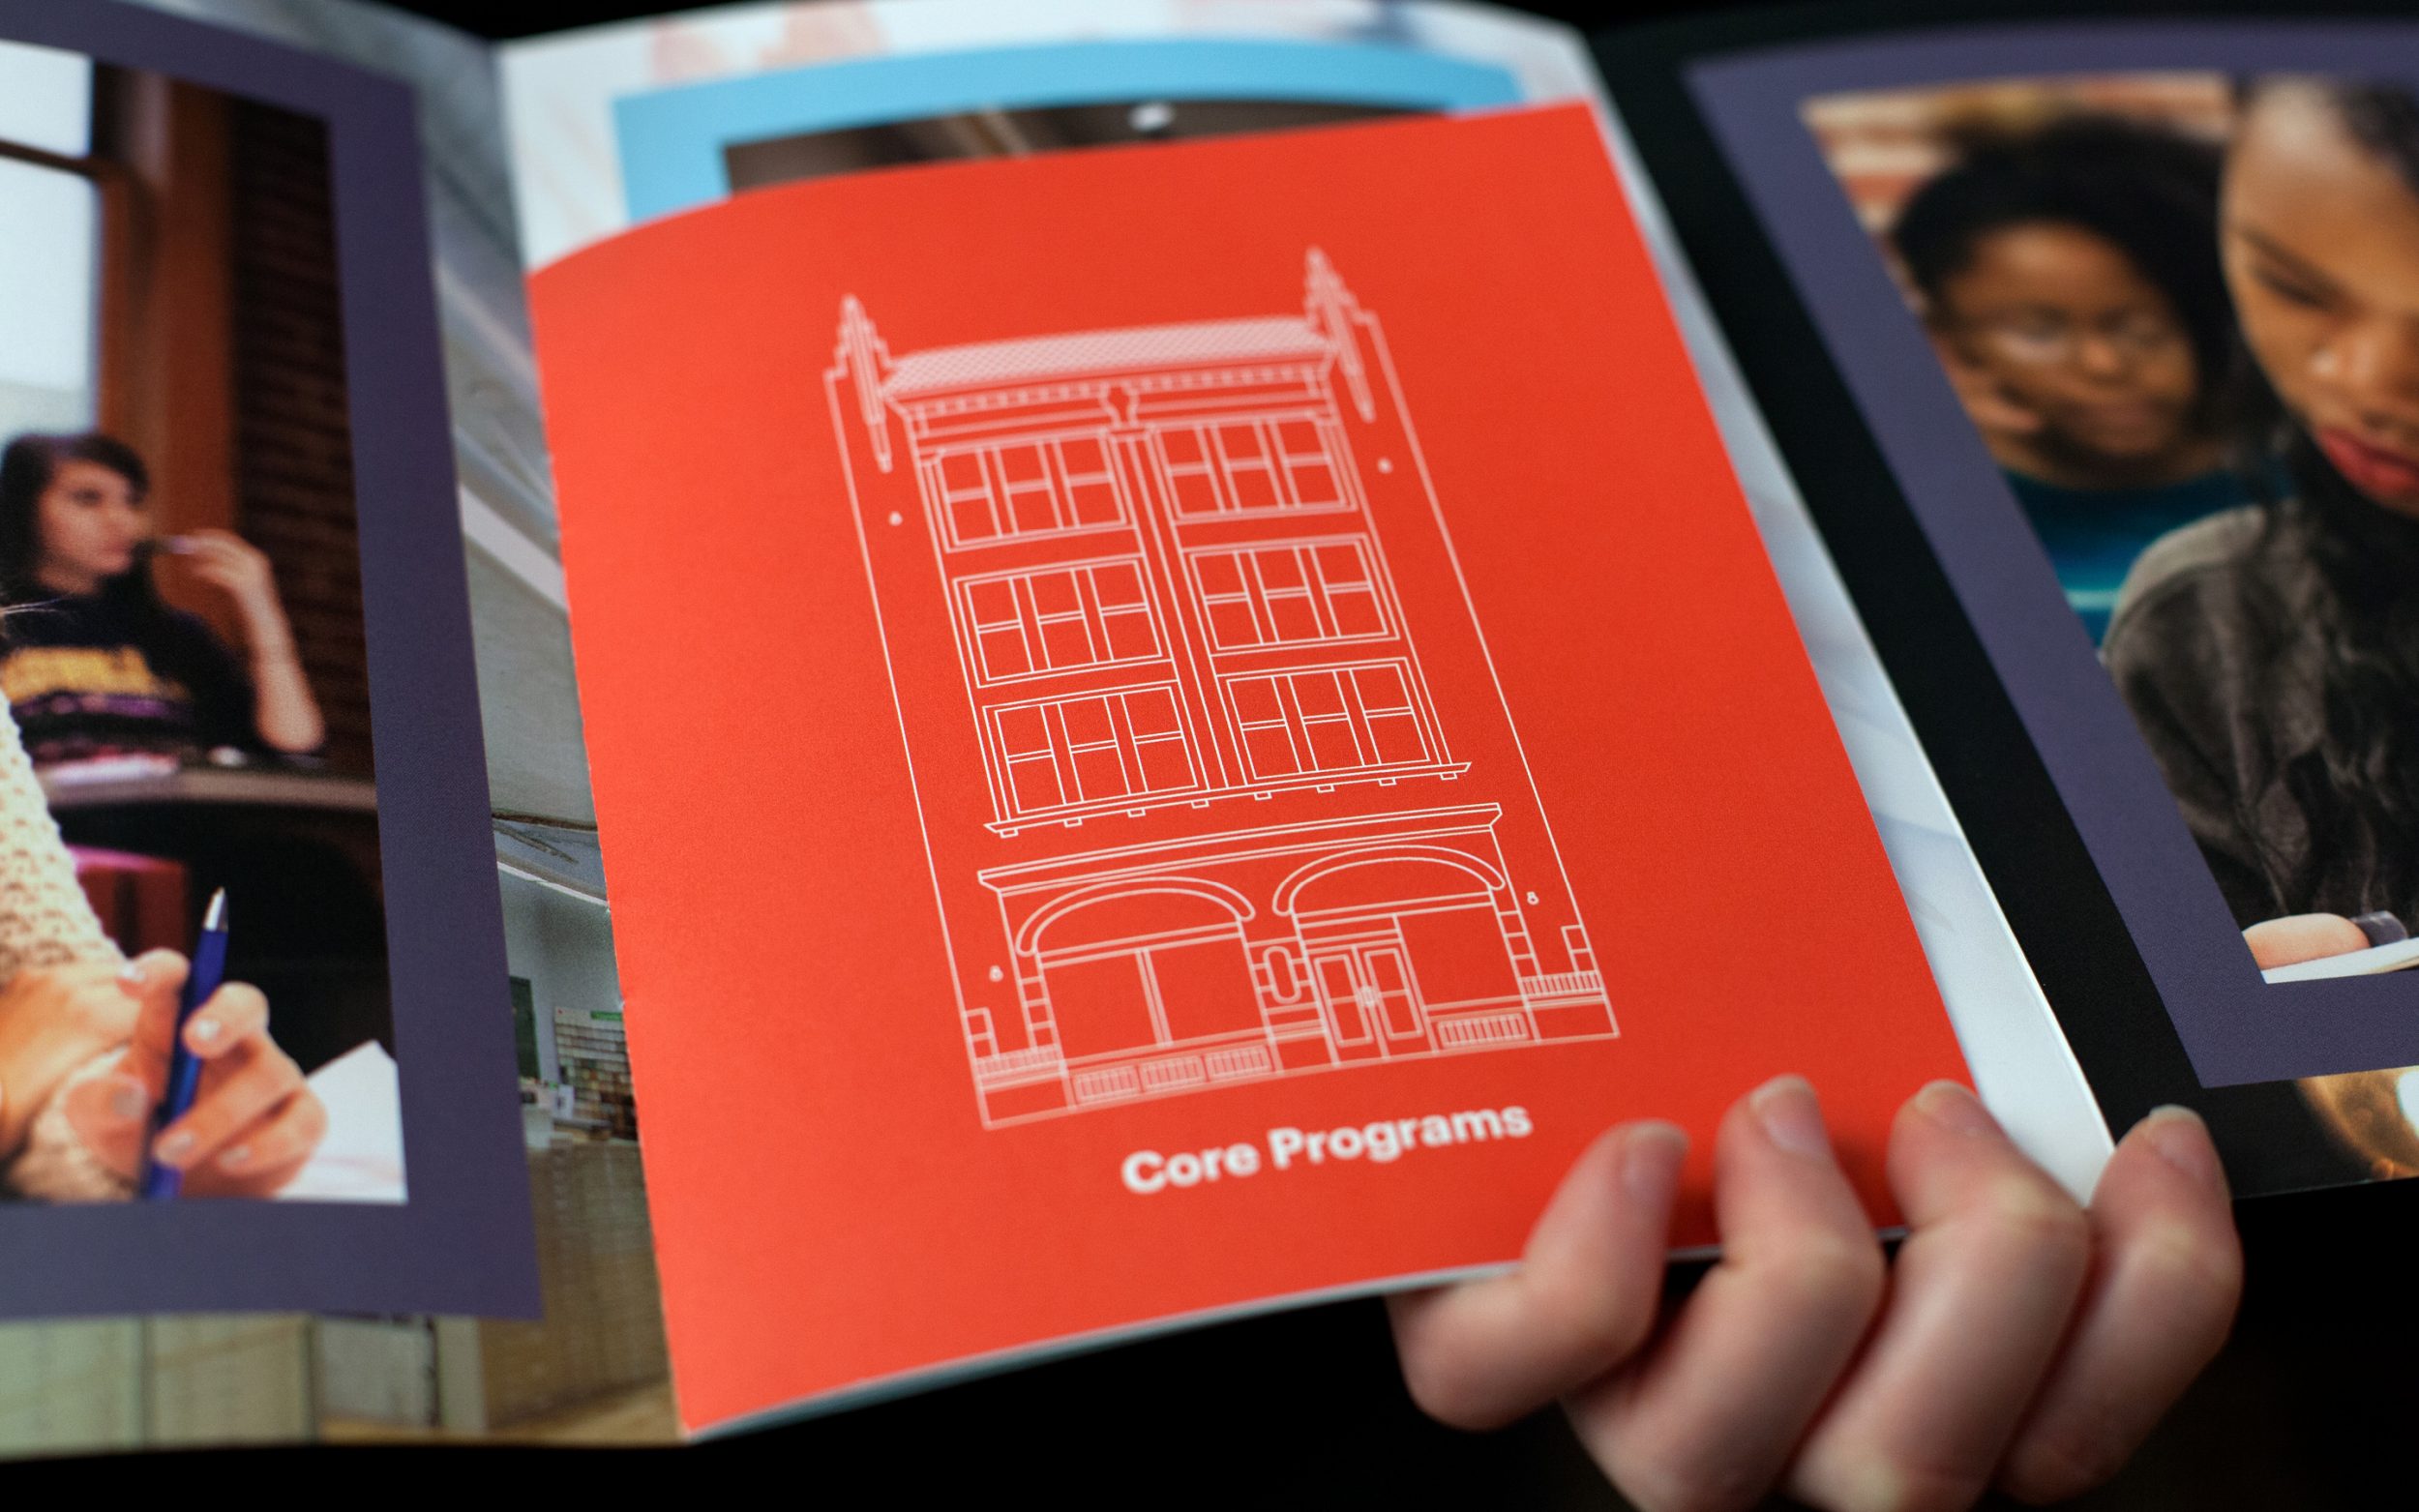 Branded brochure; Stevens Institute of Business and Arts.